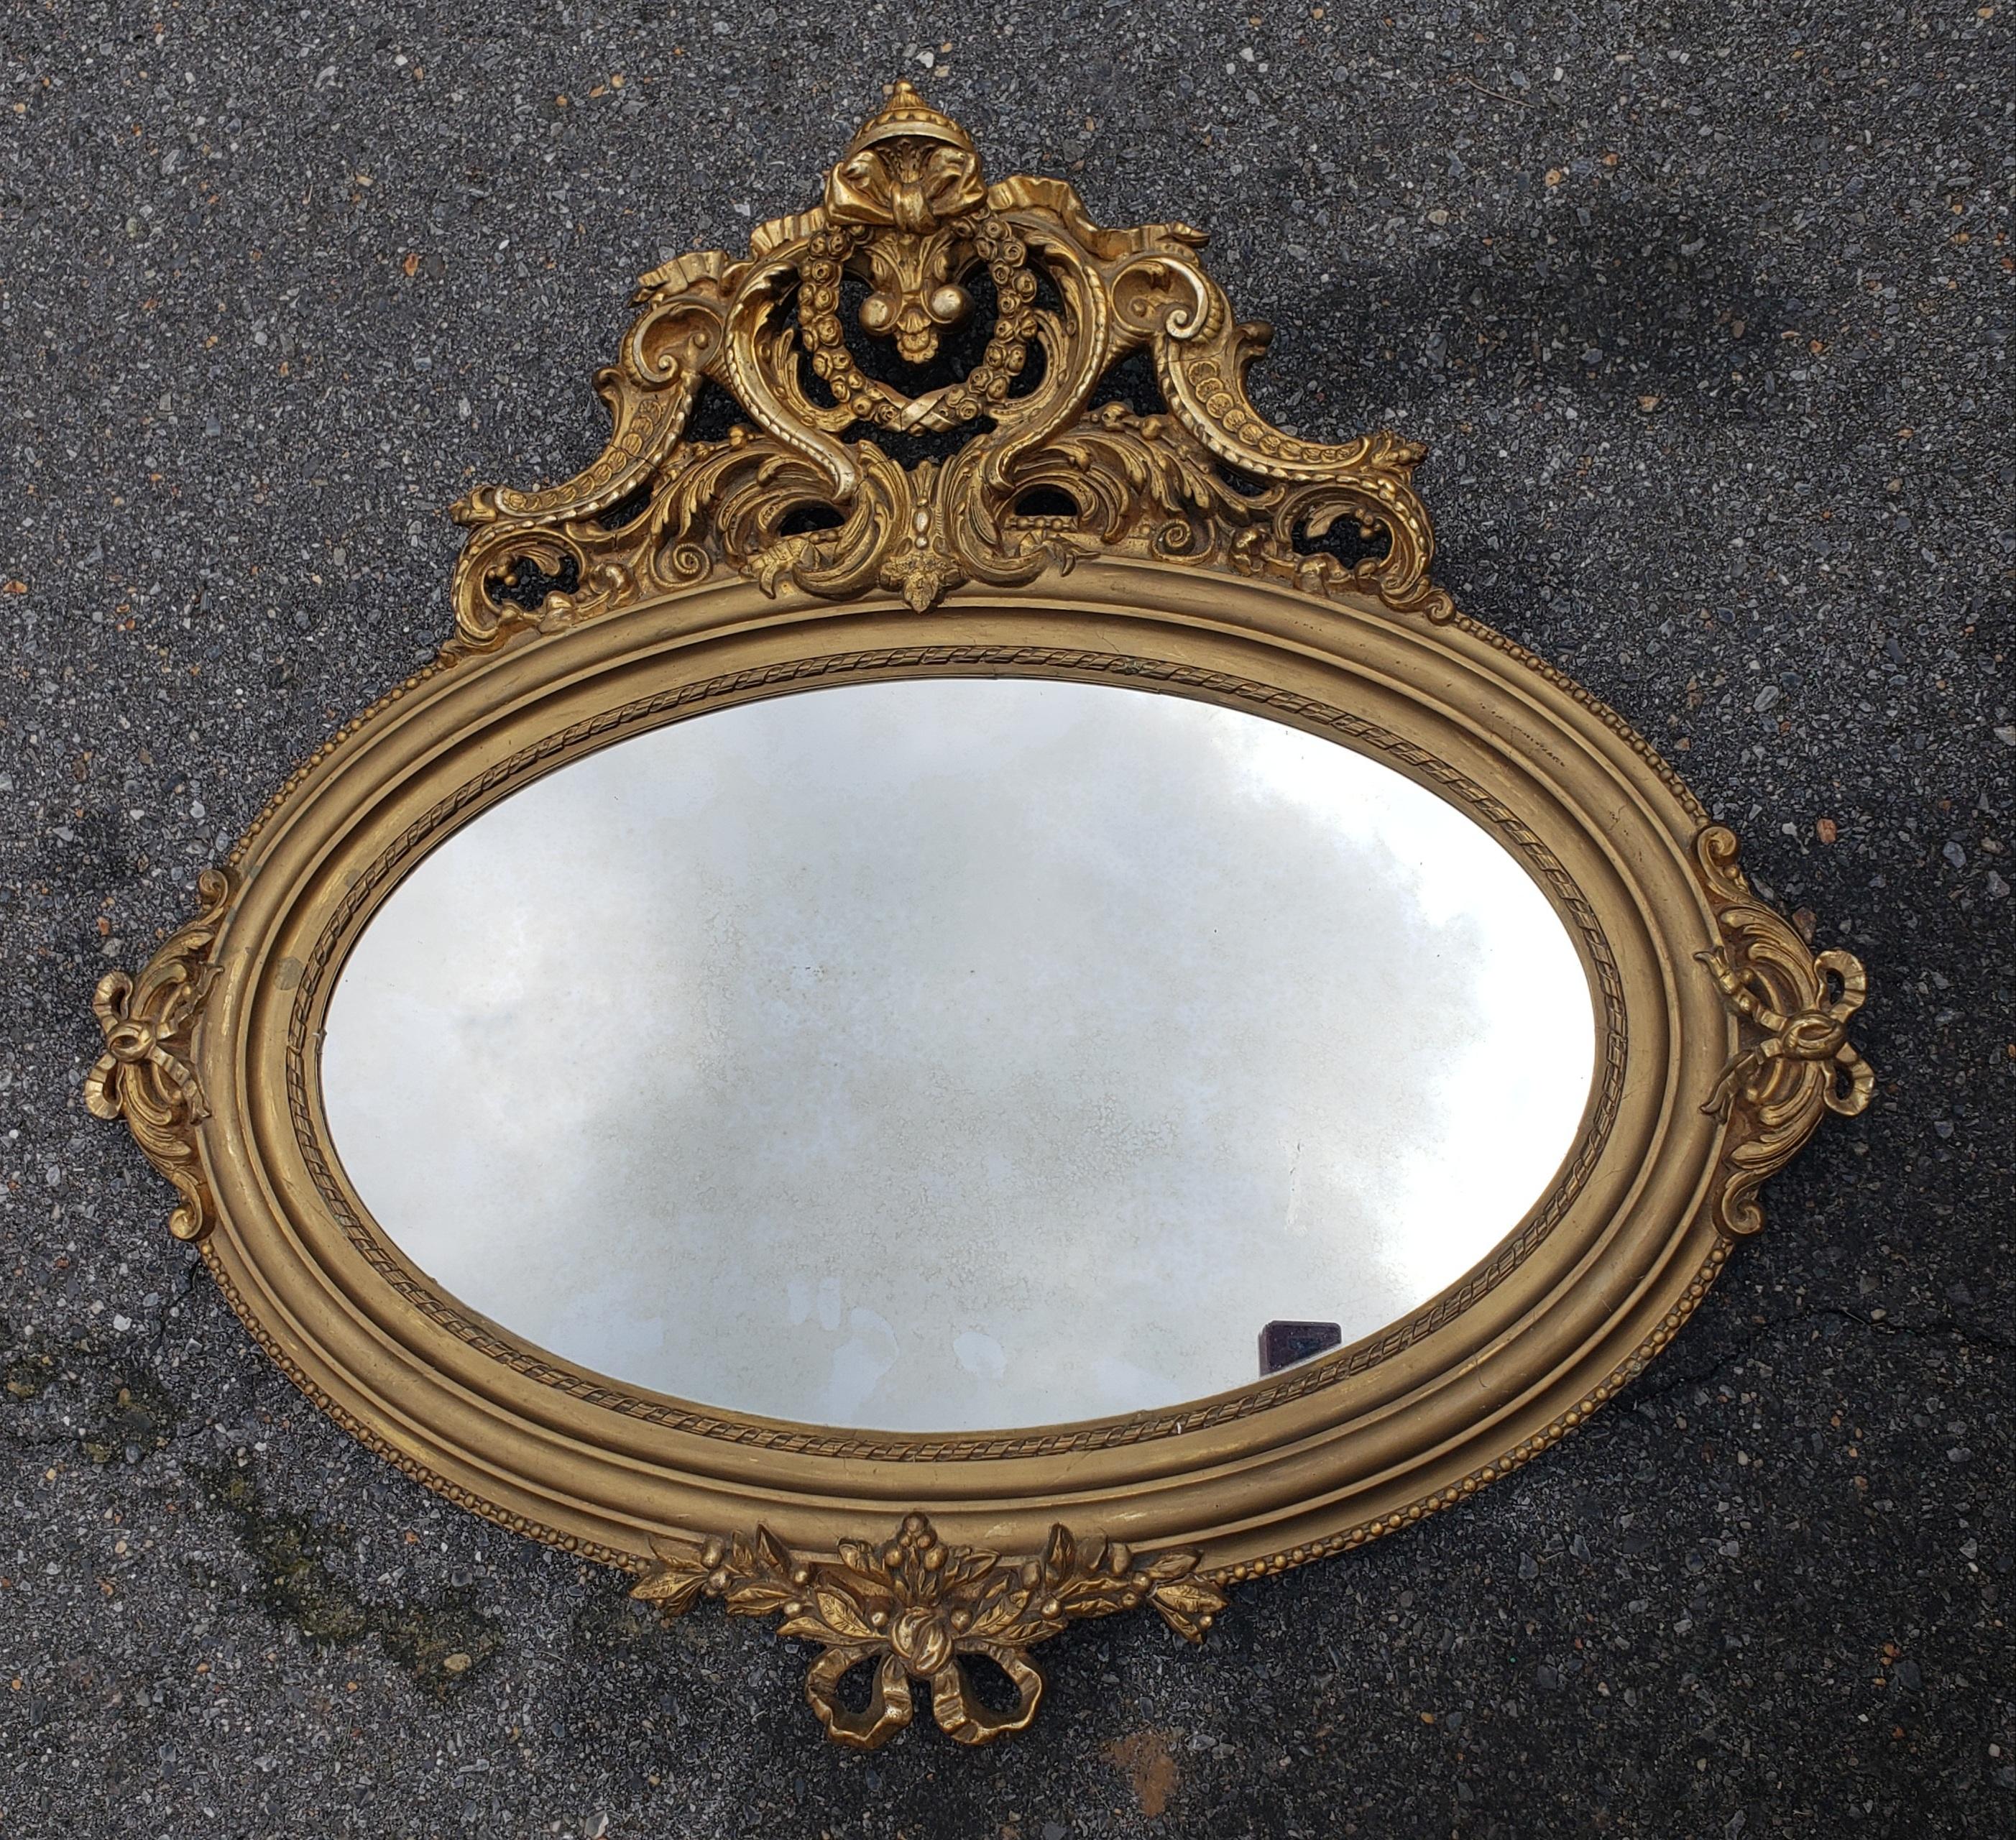 Highly decorative giltwood frame Louis XVI style wall oval mirror.
Measures 42